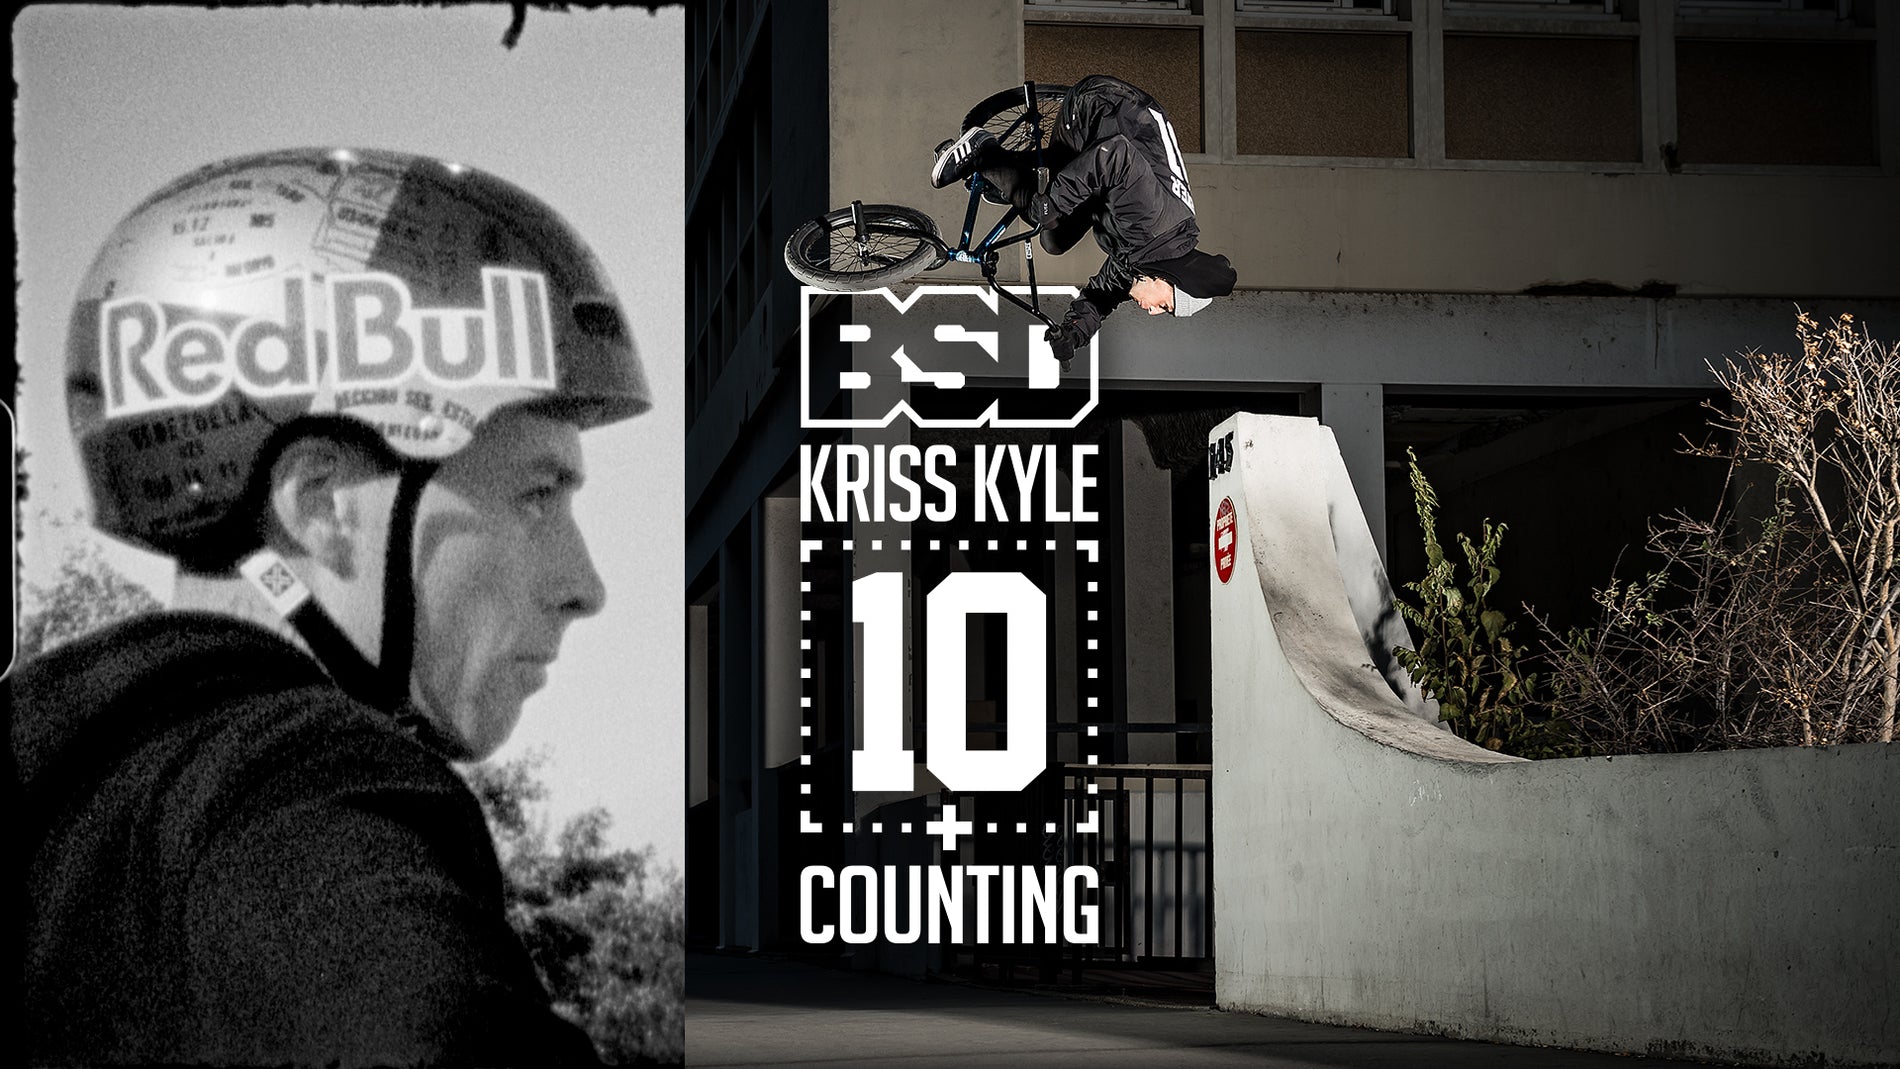 Kriss Kyle, 10 & Counting...